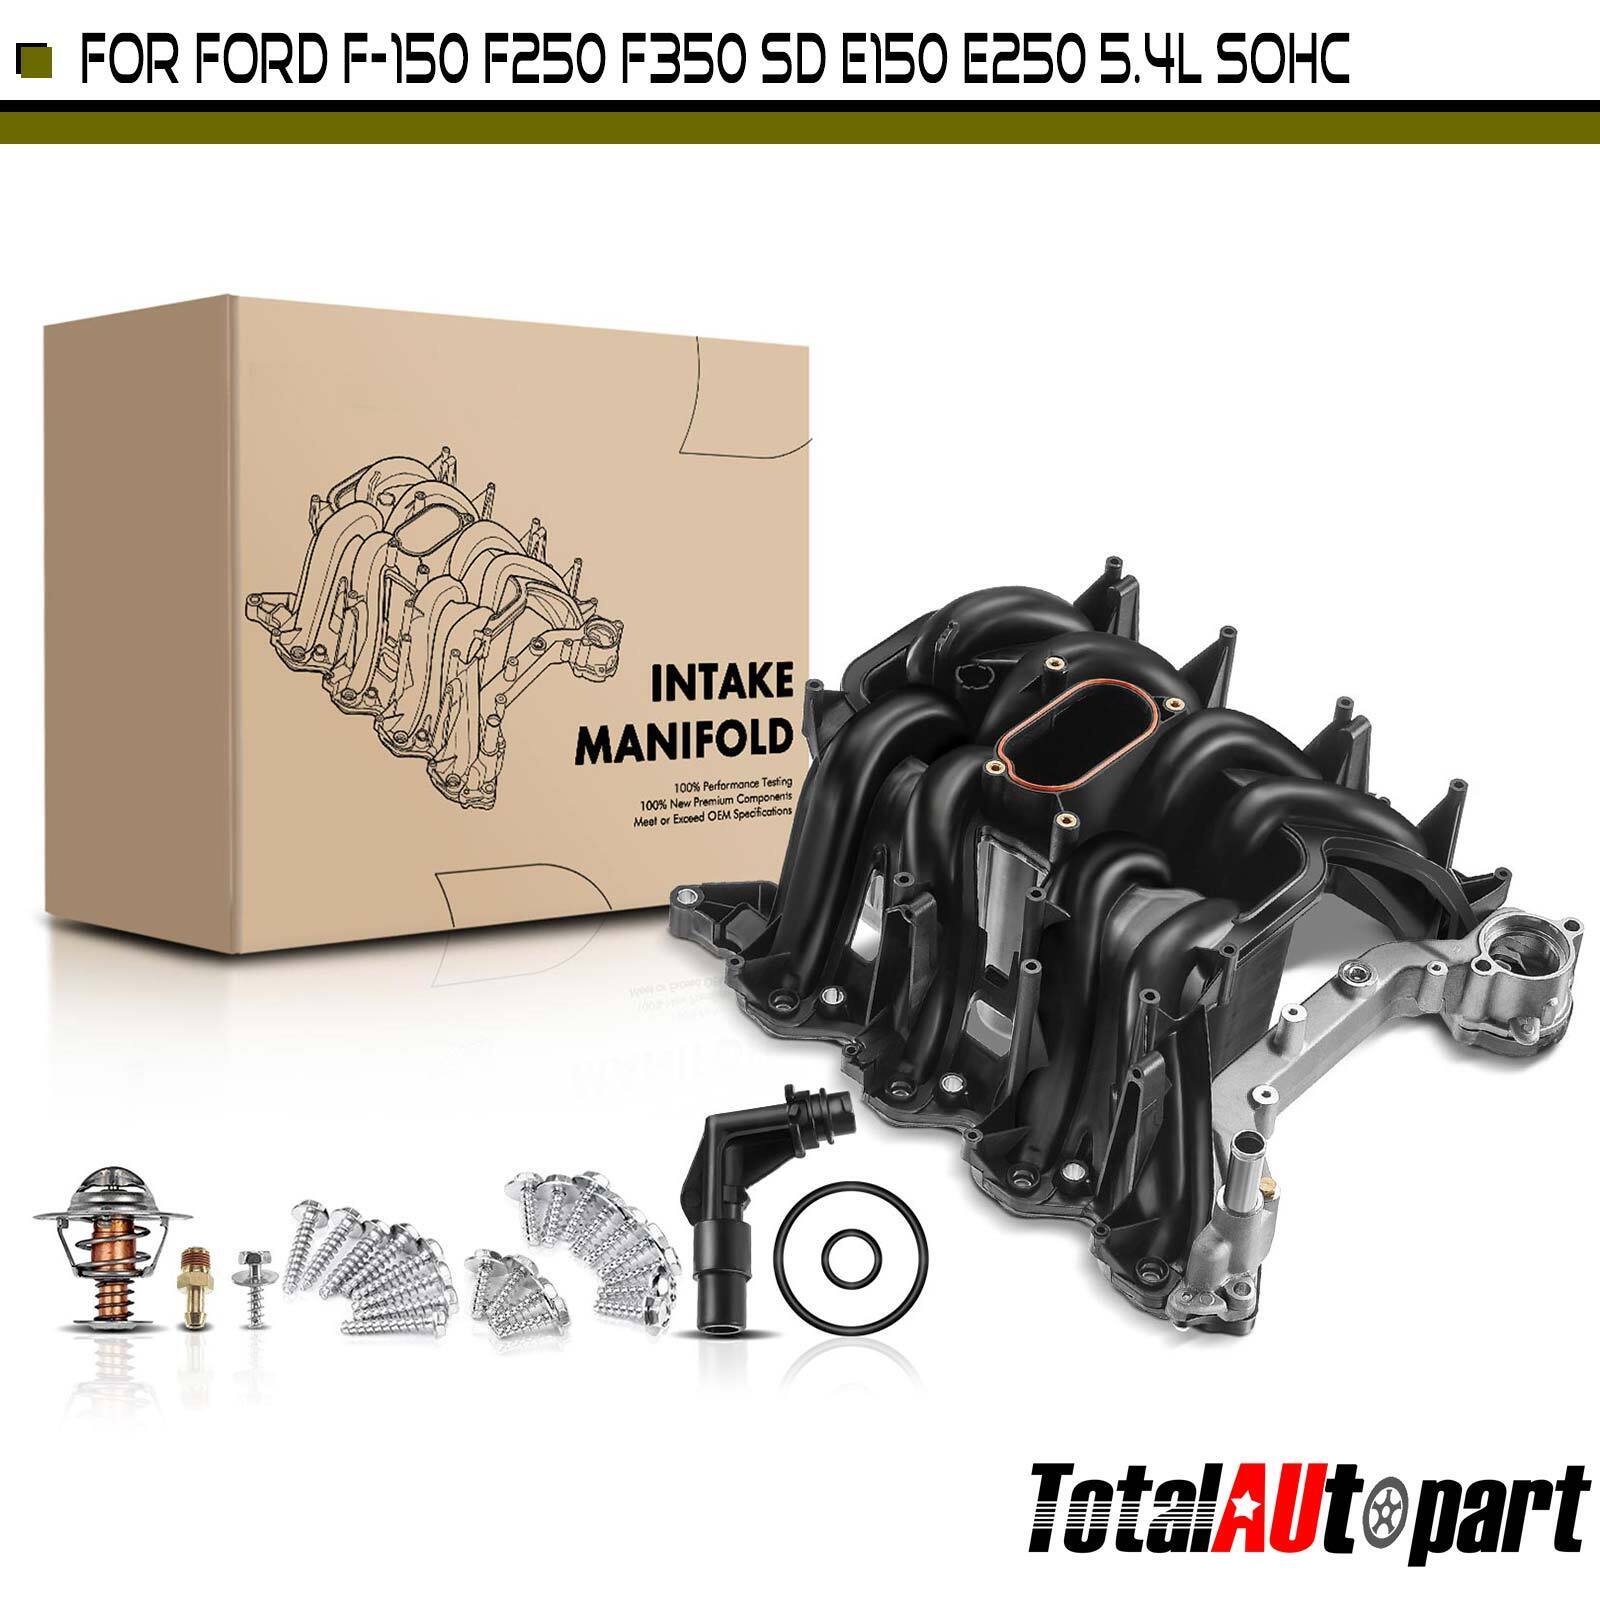 Intake Manifold Kits for Ford F-150 E-250 F-250 Super Duty Excursion Expedition